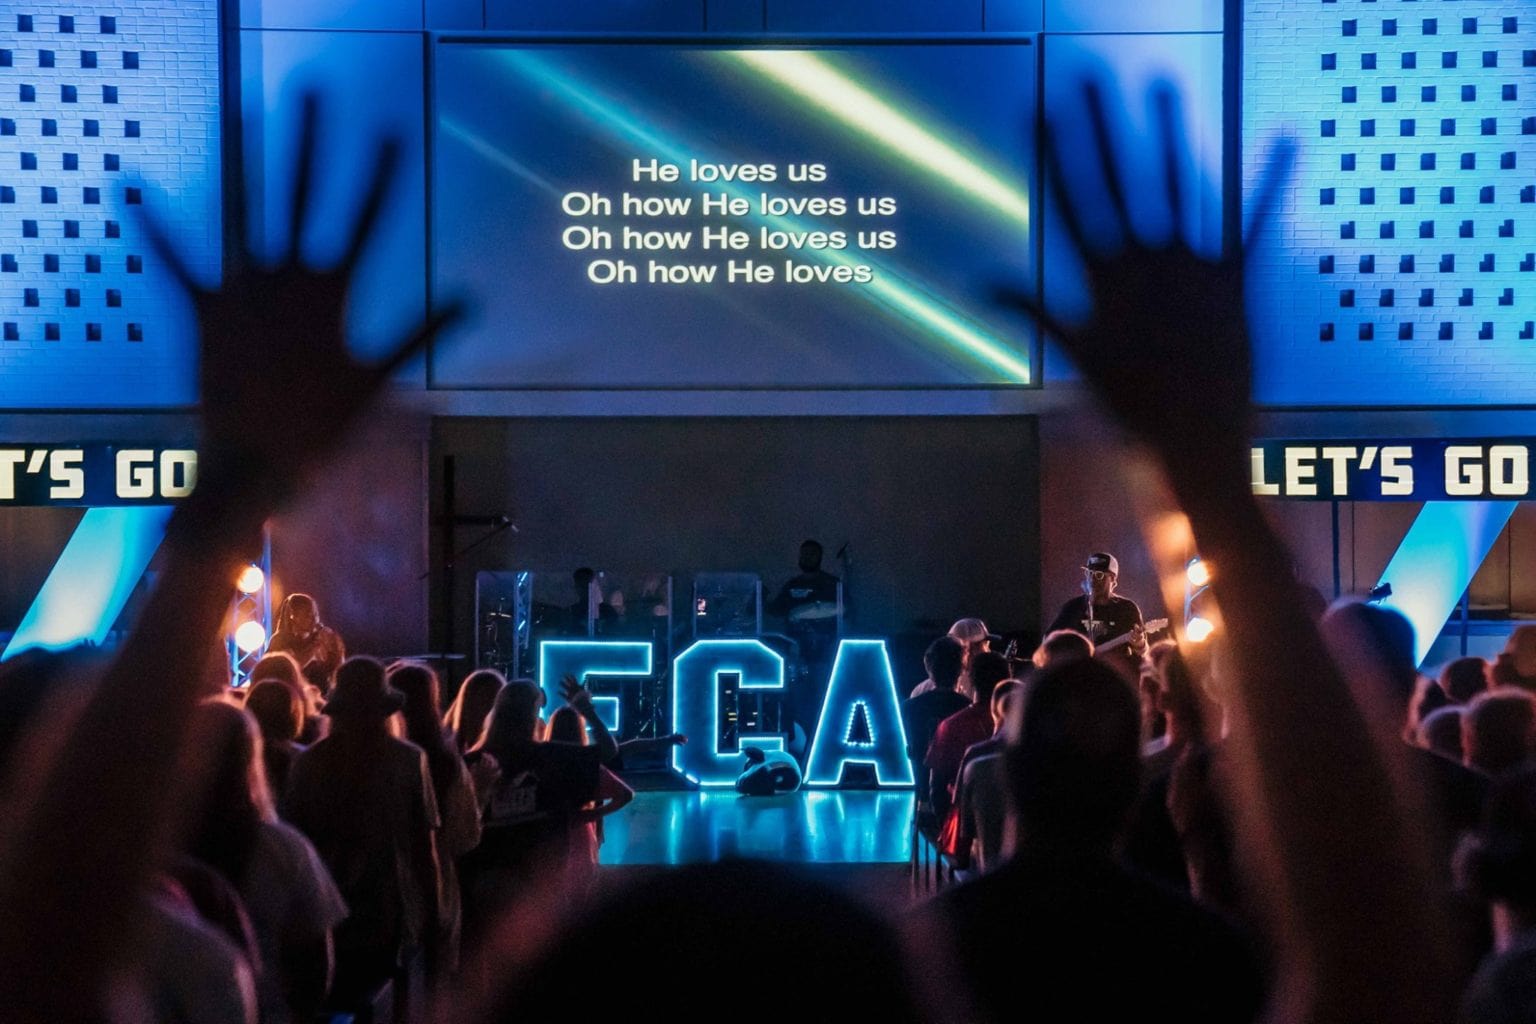 Homecoming in 2023! New announcement for FCA WYO Sports Camps